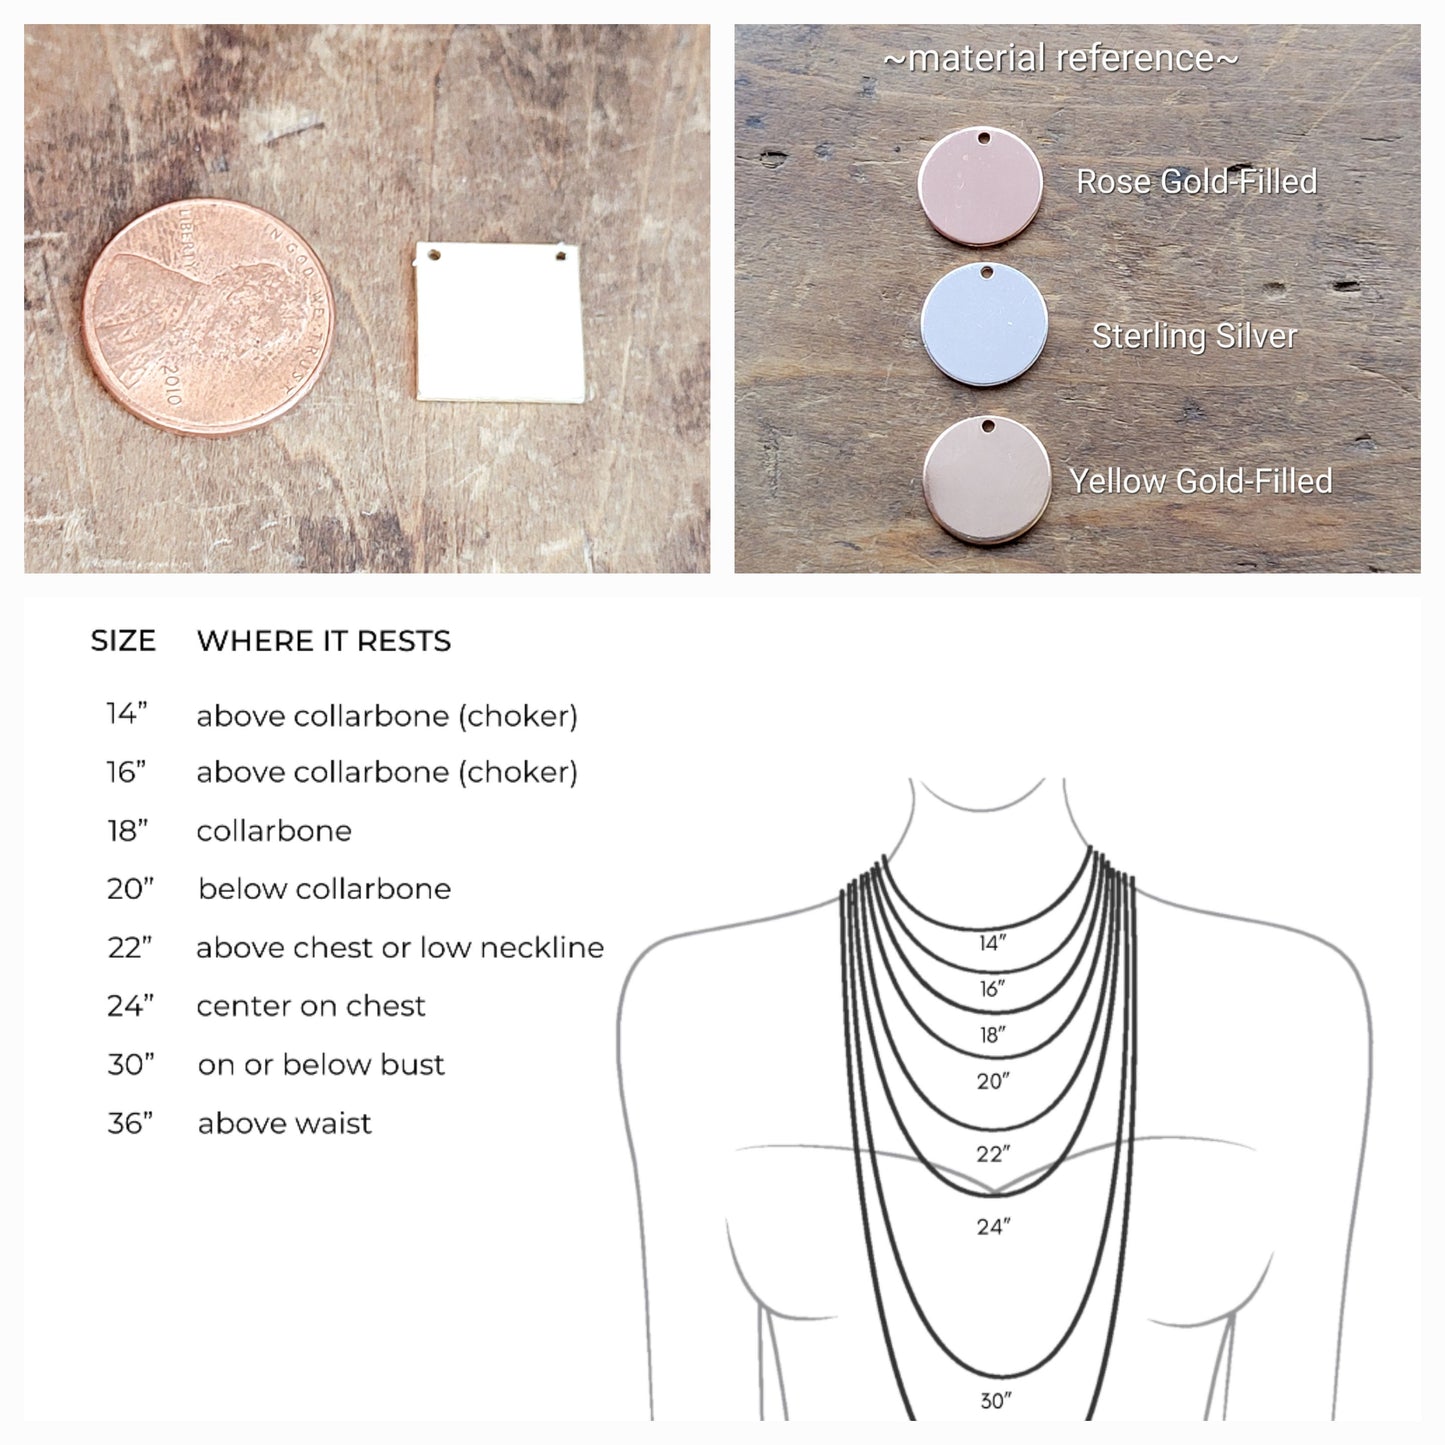 Honey Verse Jewelry Size Length + Material Reference Guide